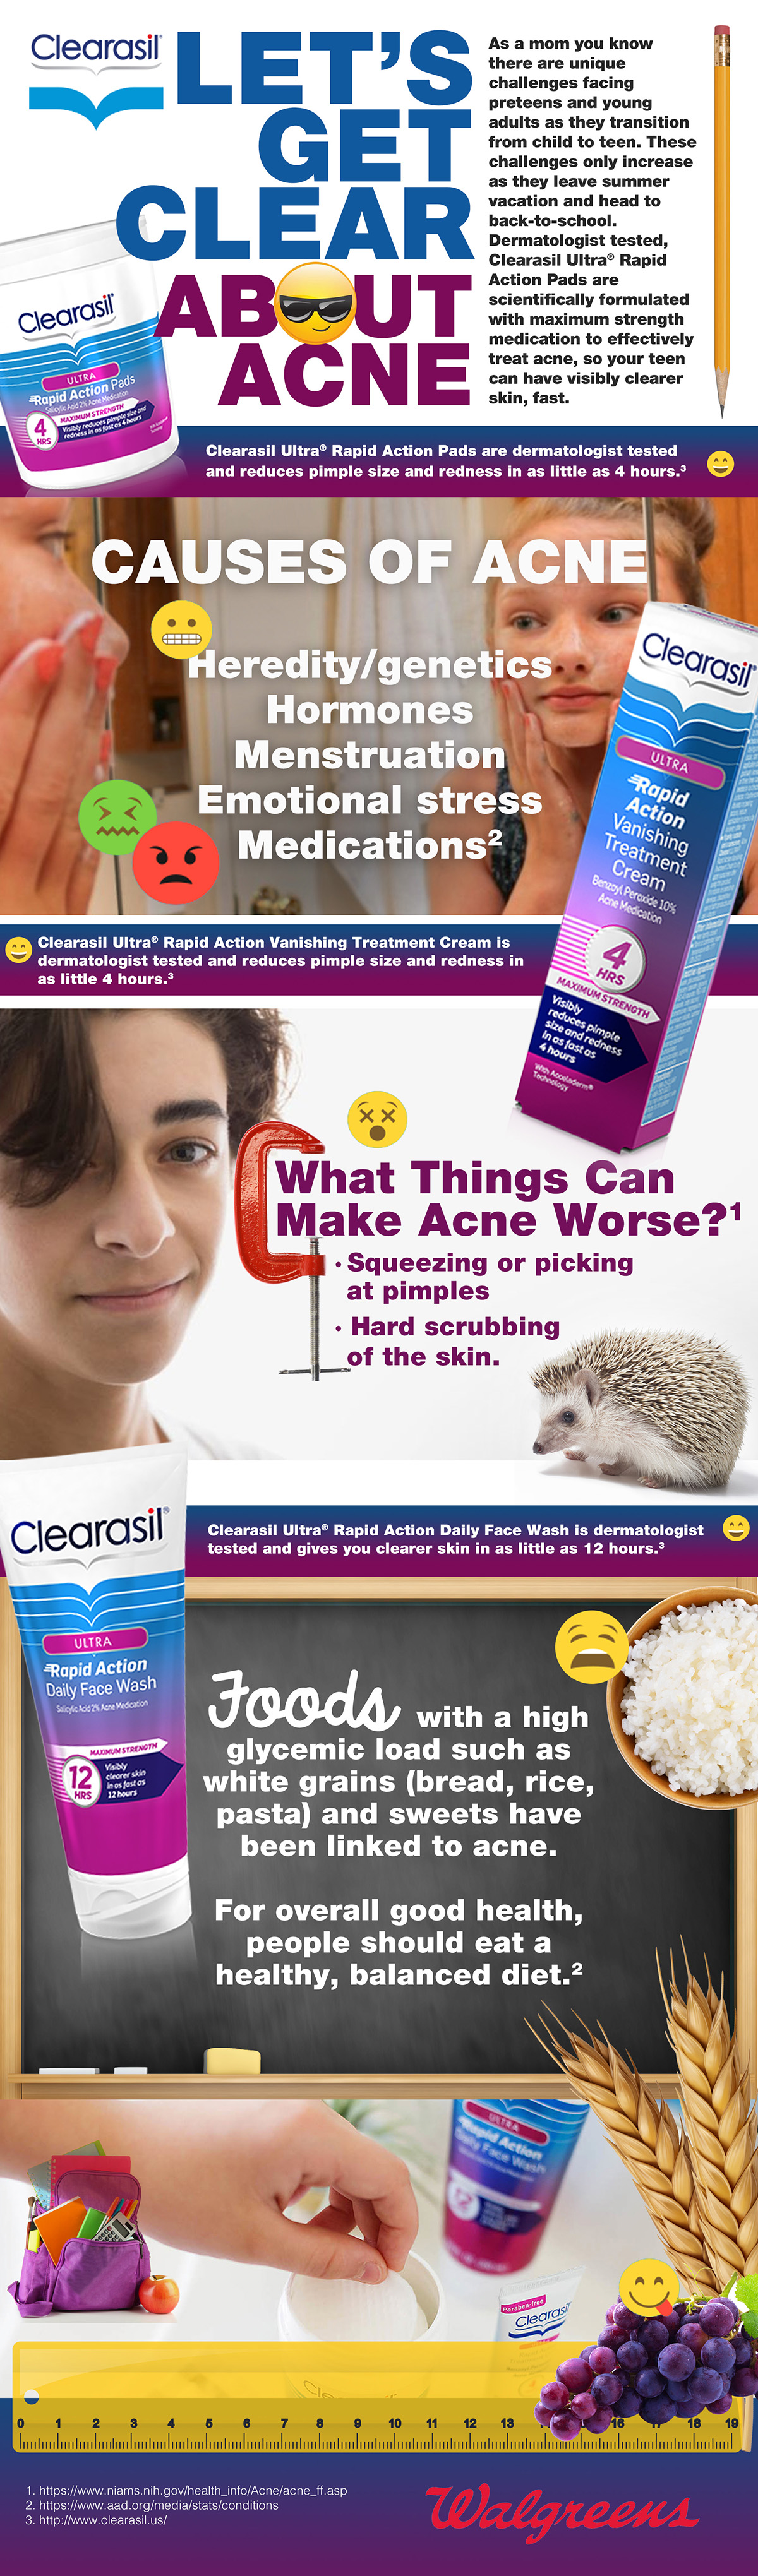 Clearasil Infographic